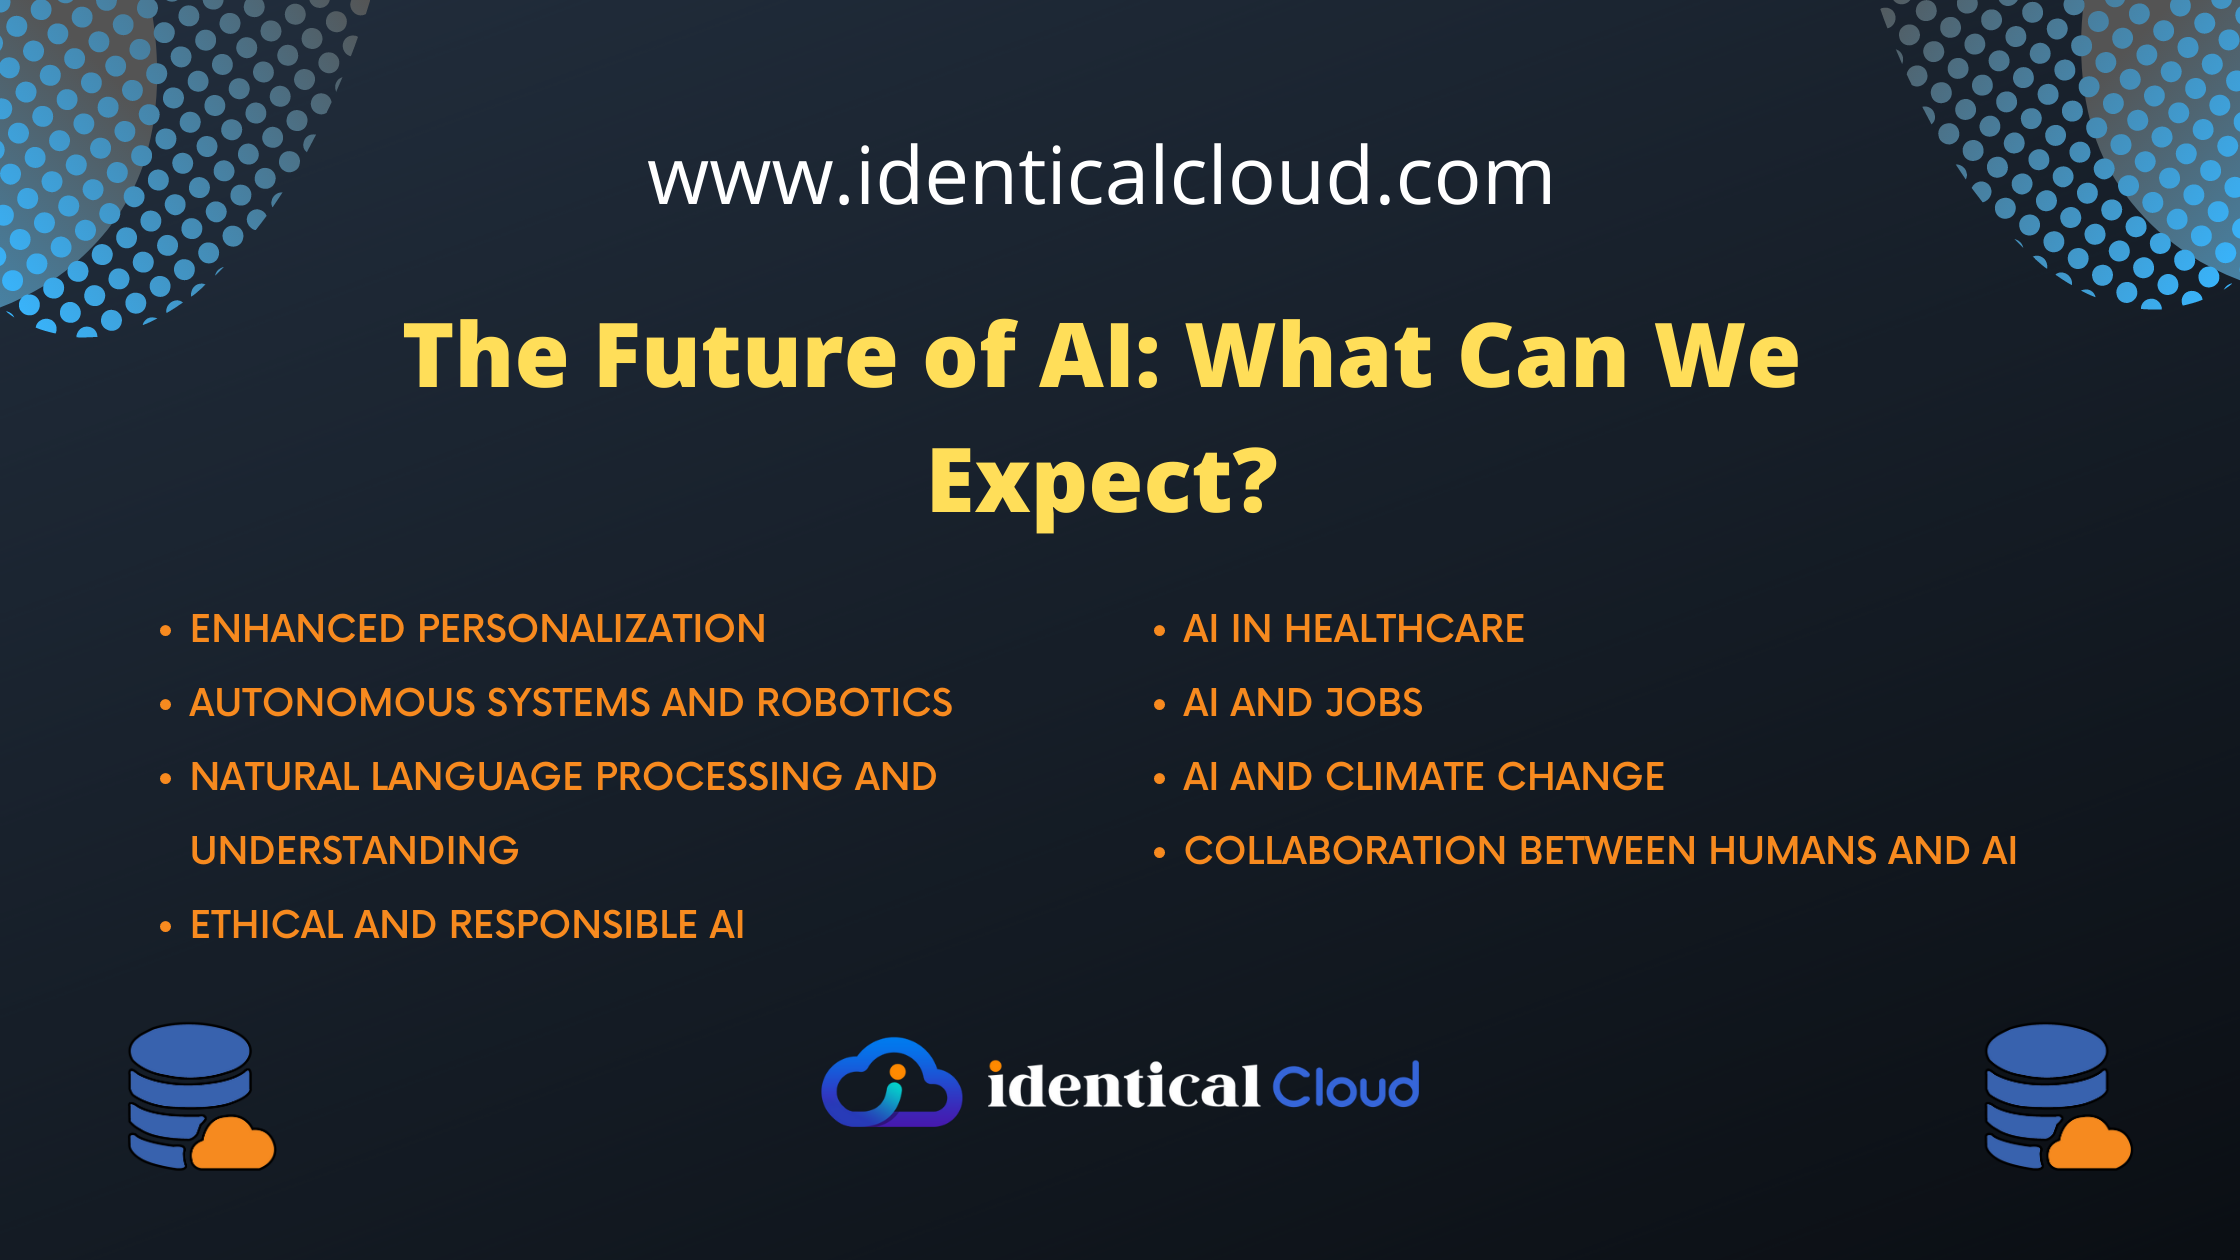 The Future of AI: What Can We Expect? - identicalcloud.com